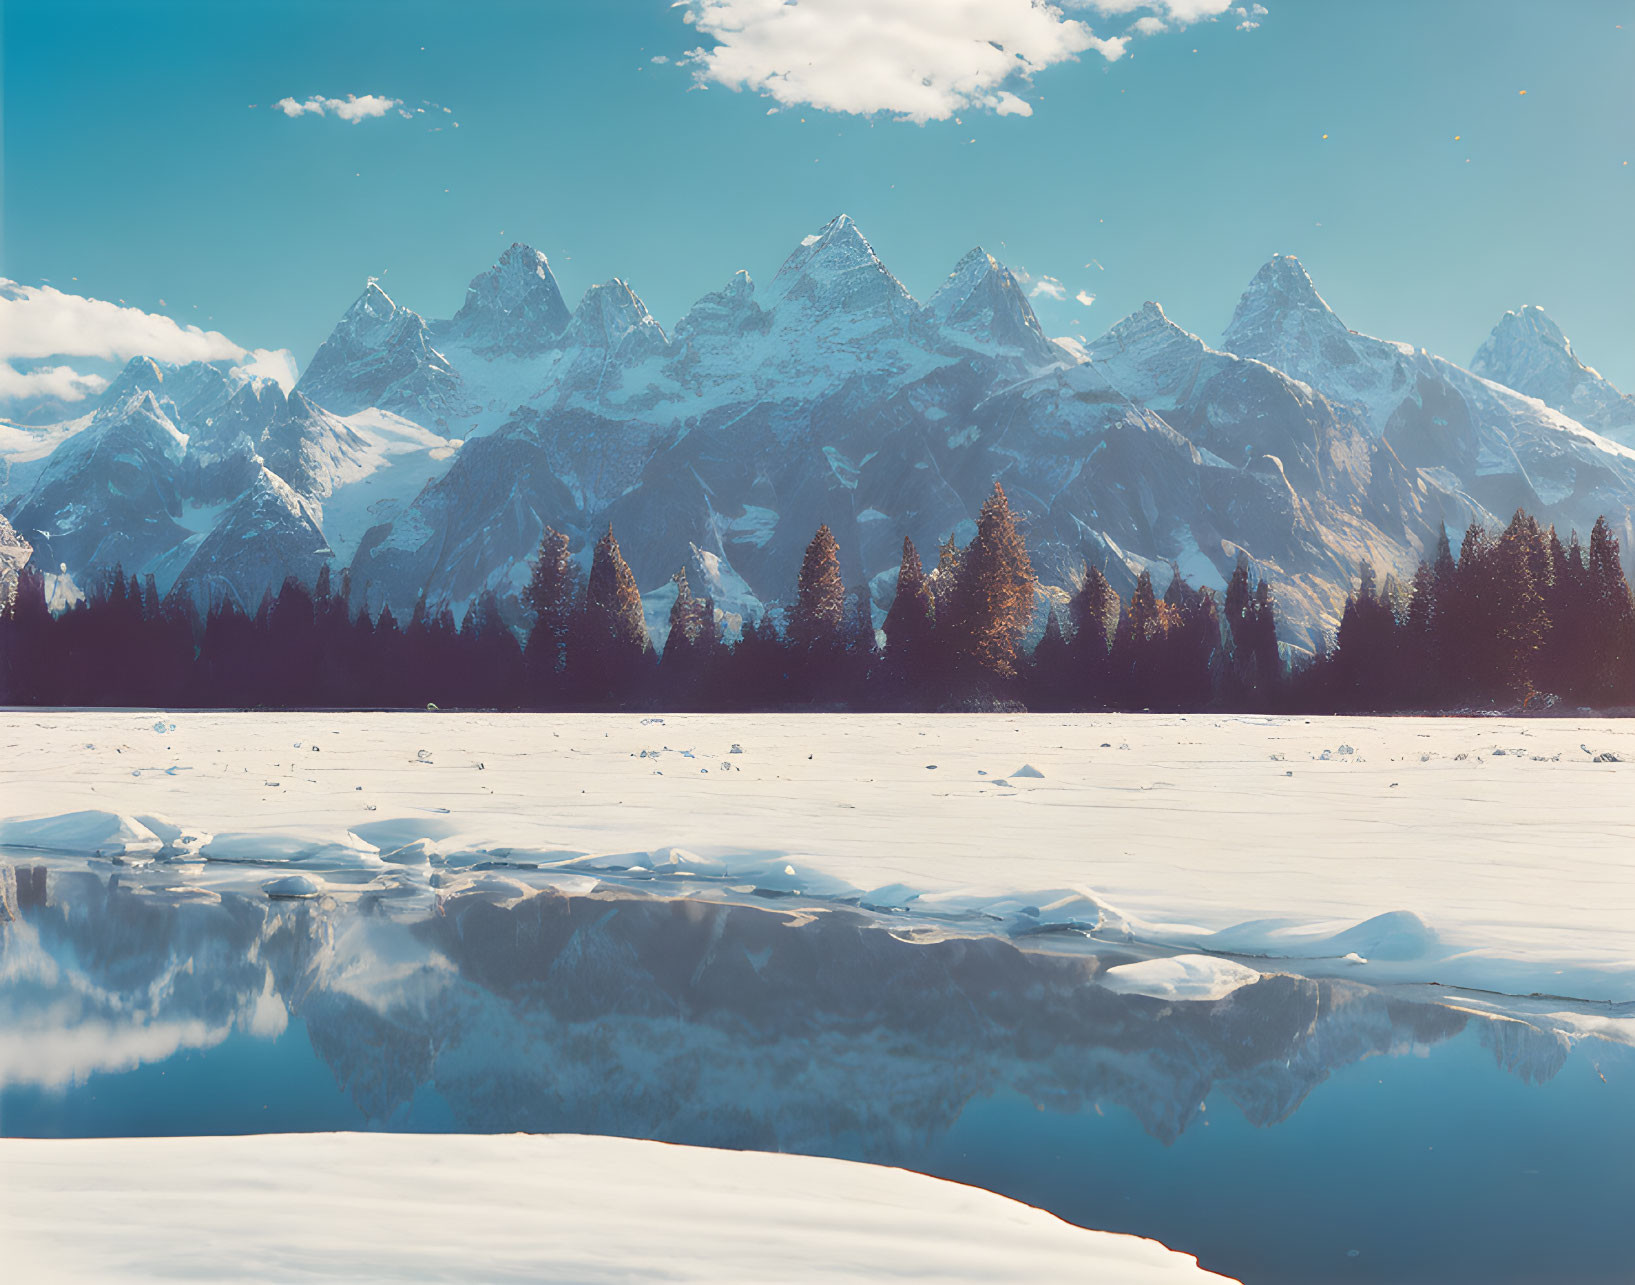 Snow-covered Foothills, Icy Lake, and Snow-Capped Peaks in Tranquil Winter Scene